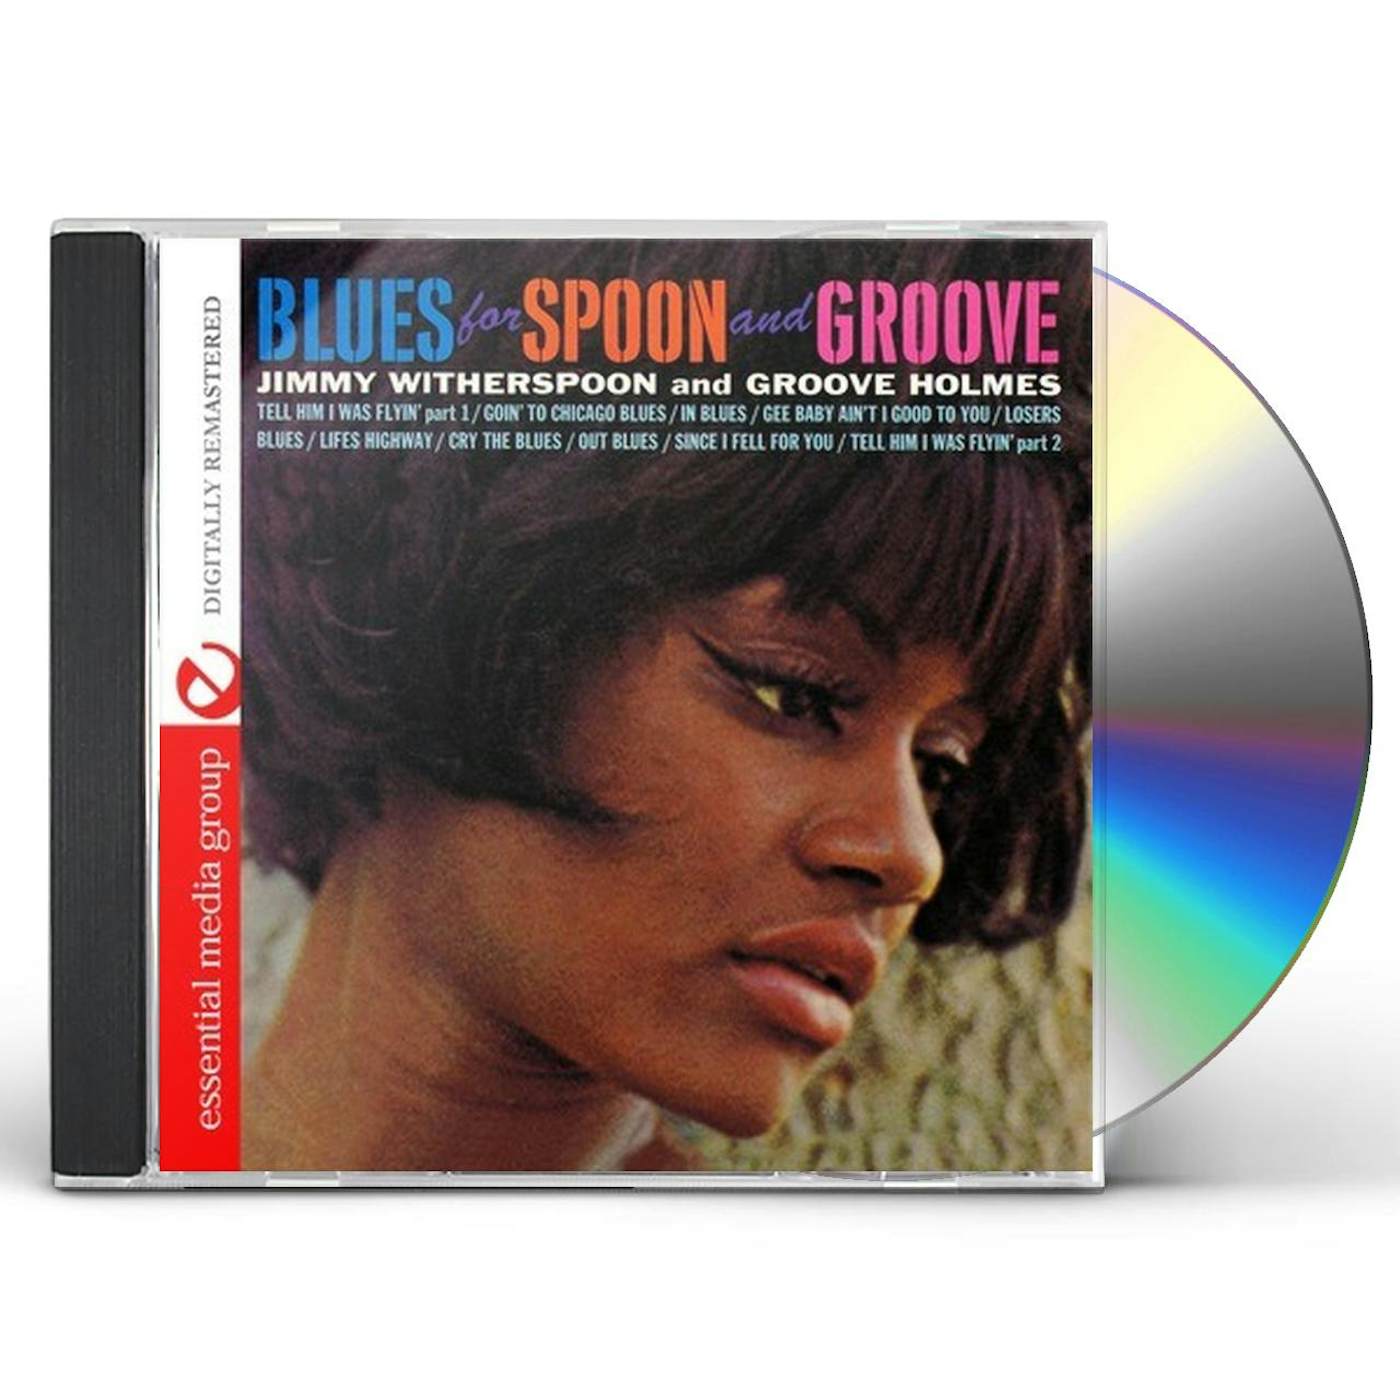 Jimmy Witherspoon BLUES FOR SPOON & GROOVE CD